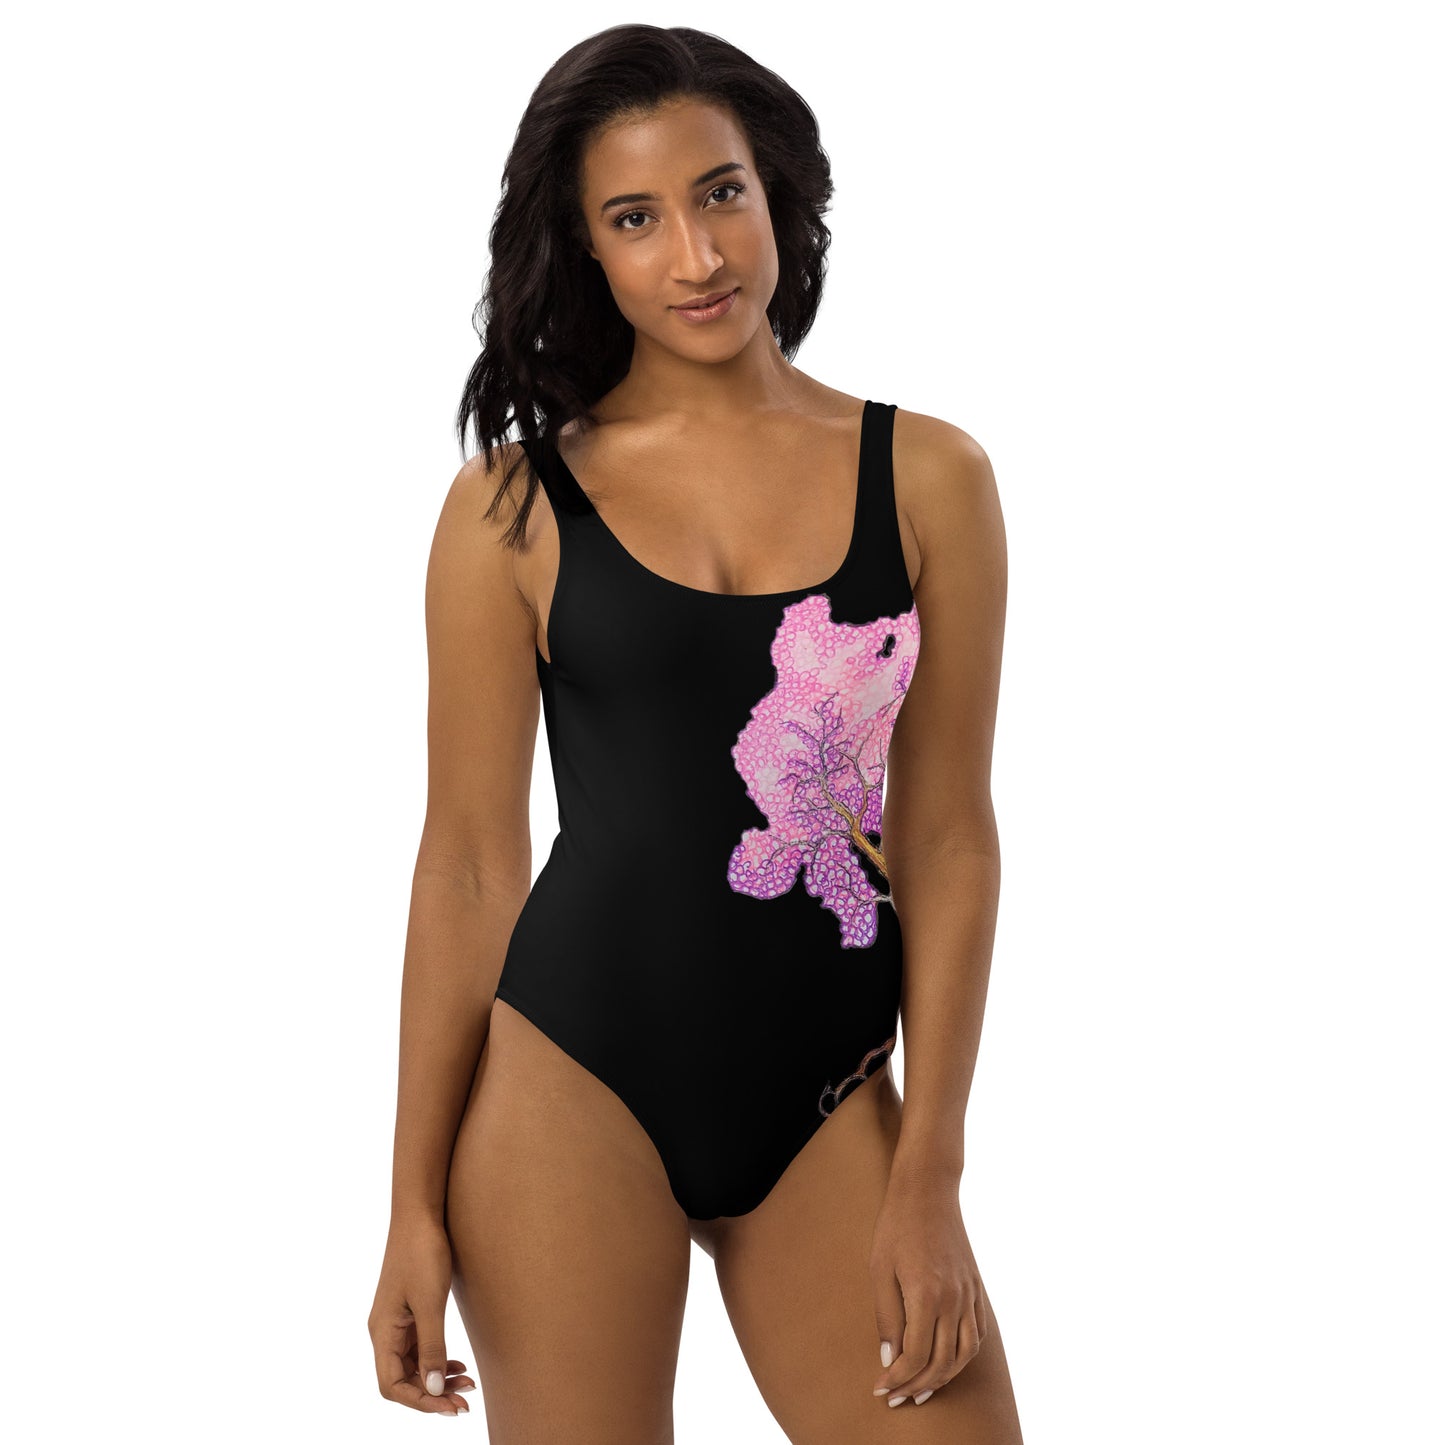 Cherry Blossom One-Piece Swimsuit